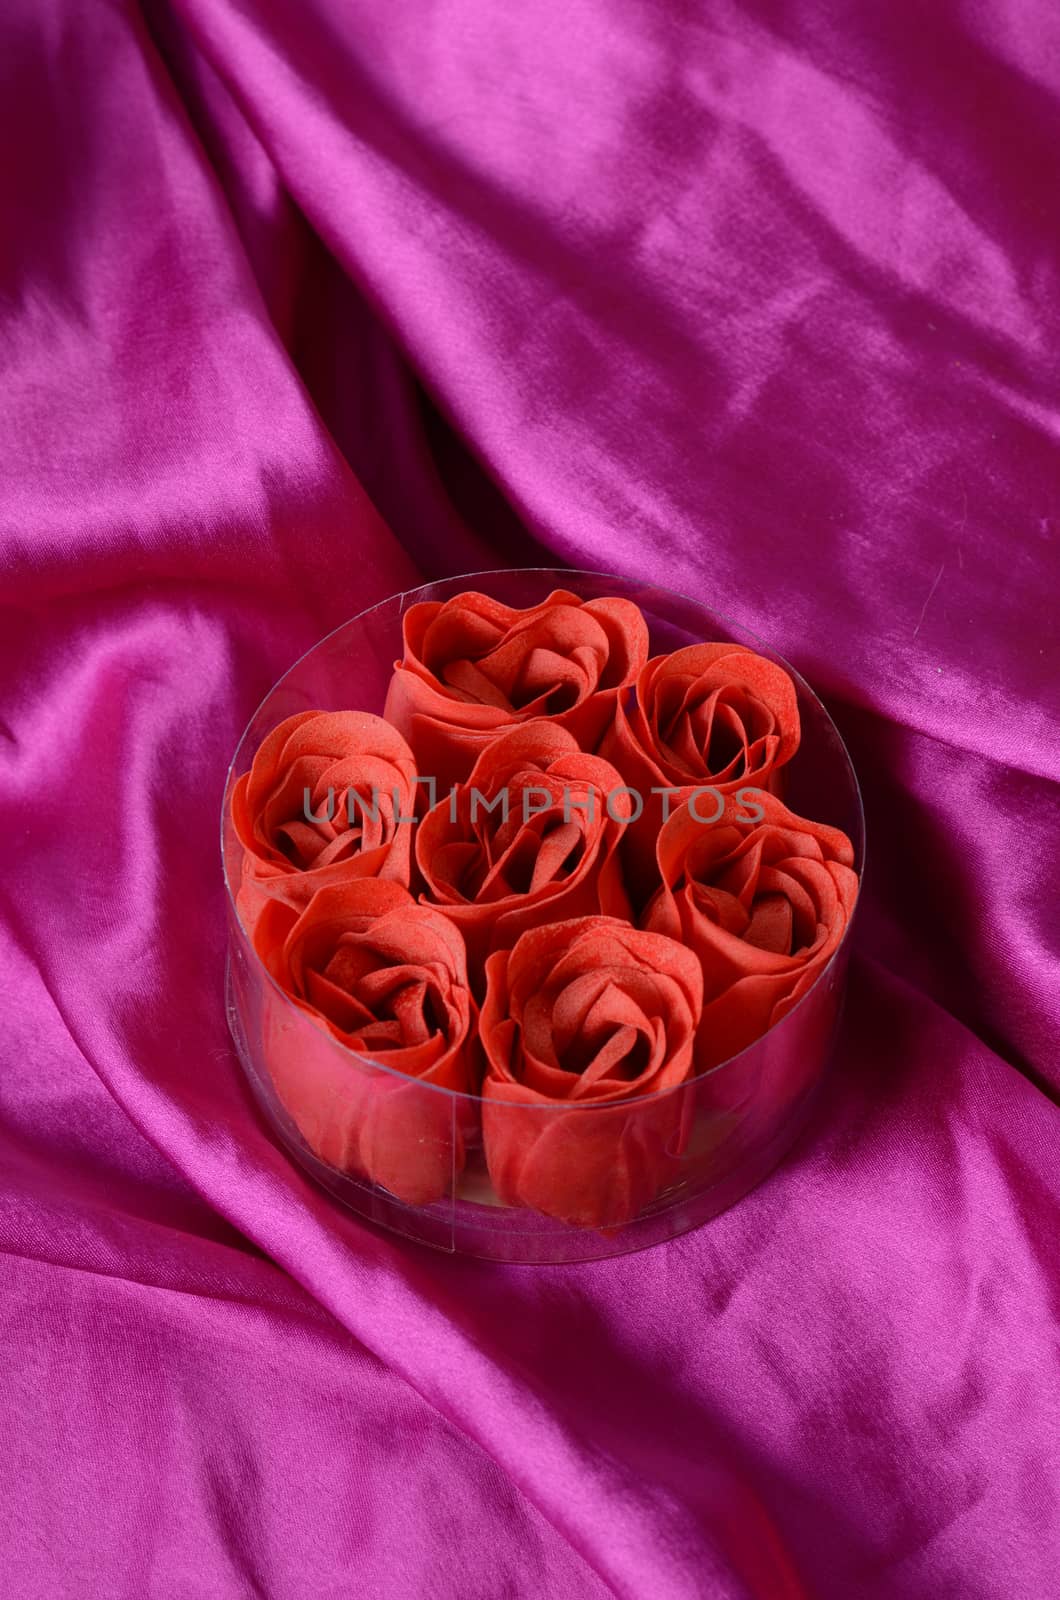 soap roses on the pink satin by sarkao